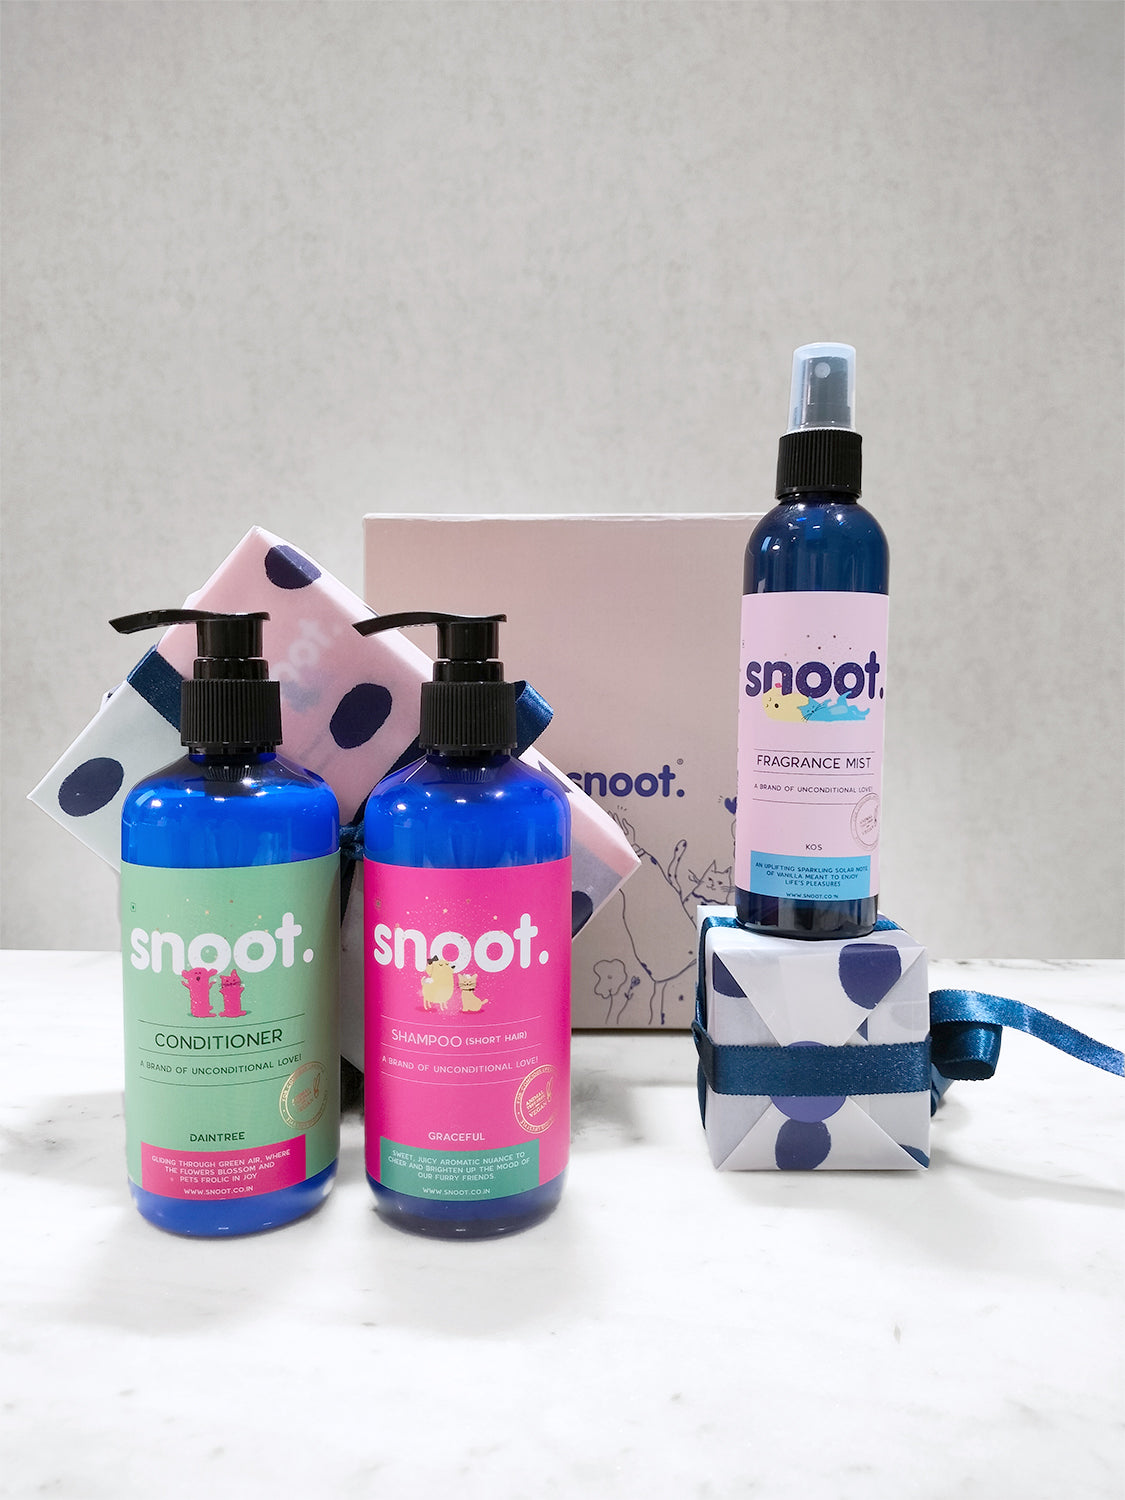 Gift set for pets, dogs, and cats featuring a pet shampoo, conditioner, and fragrance mist